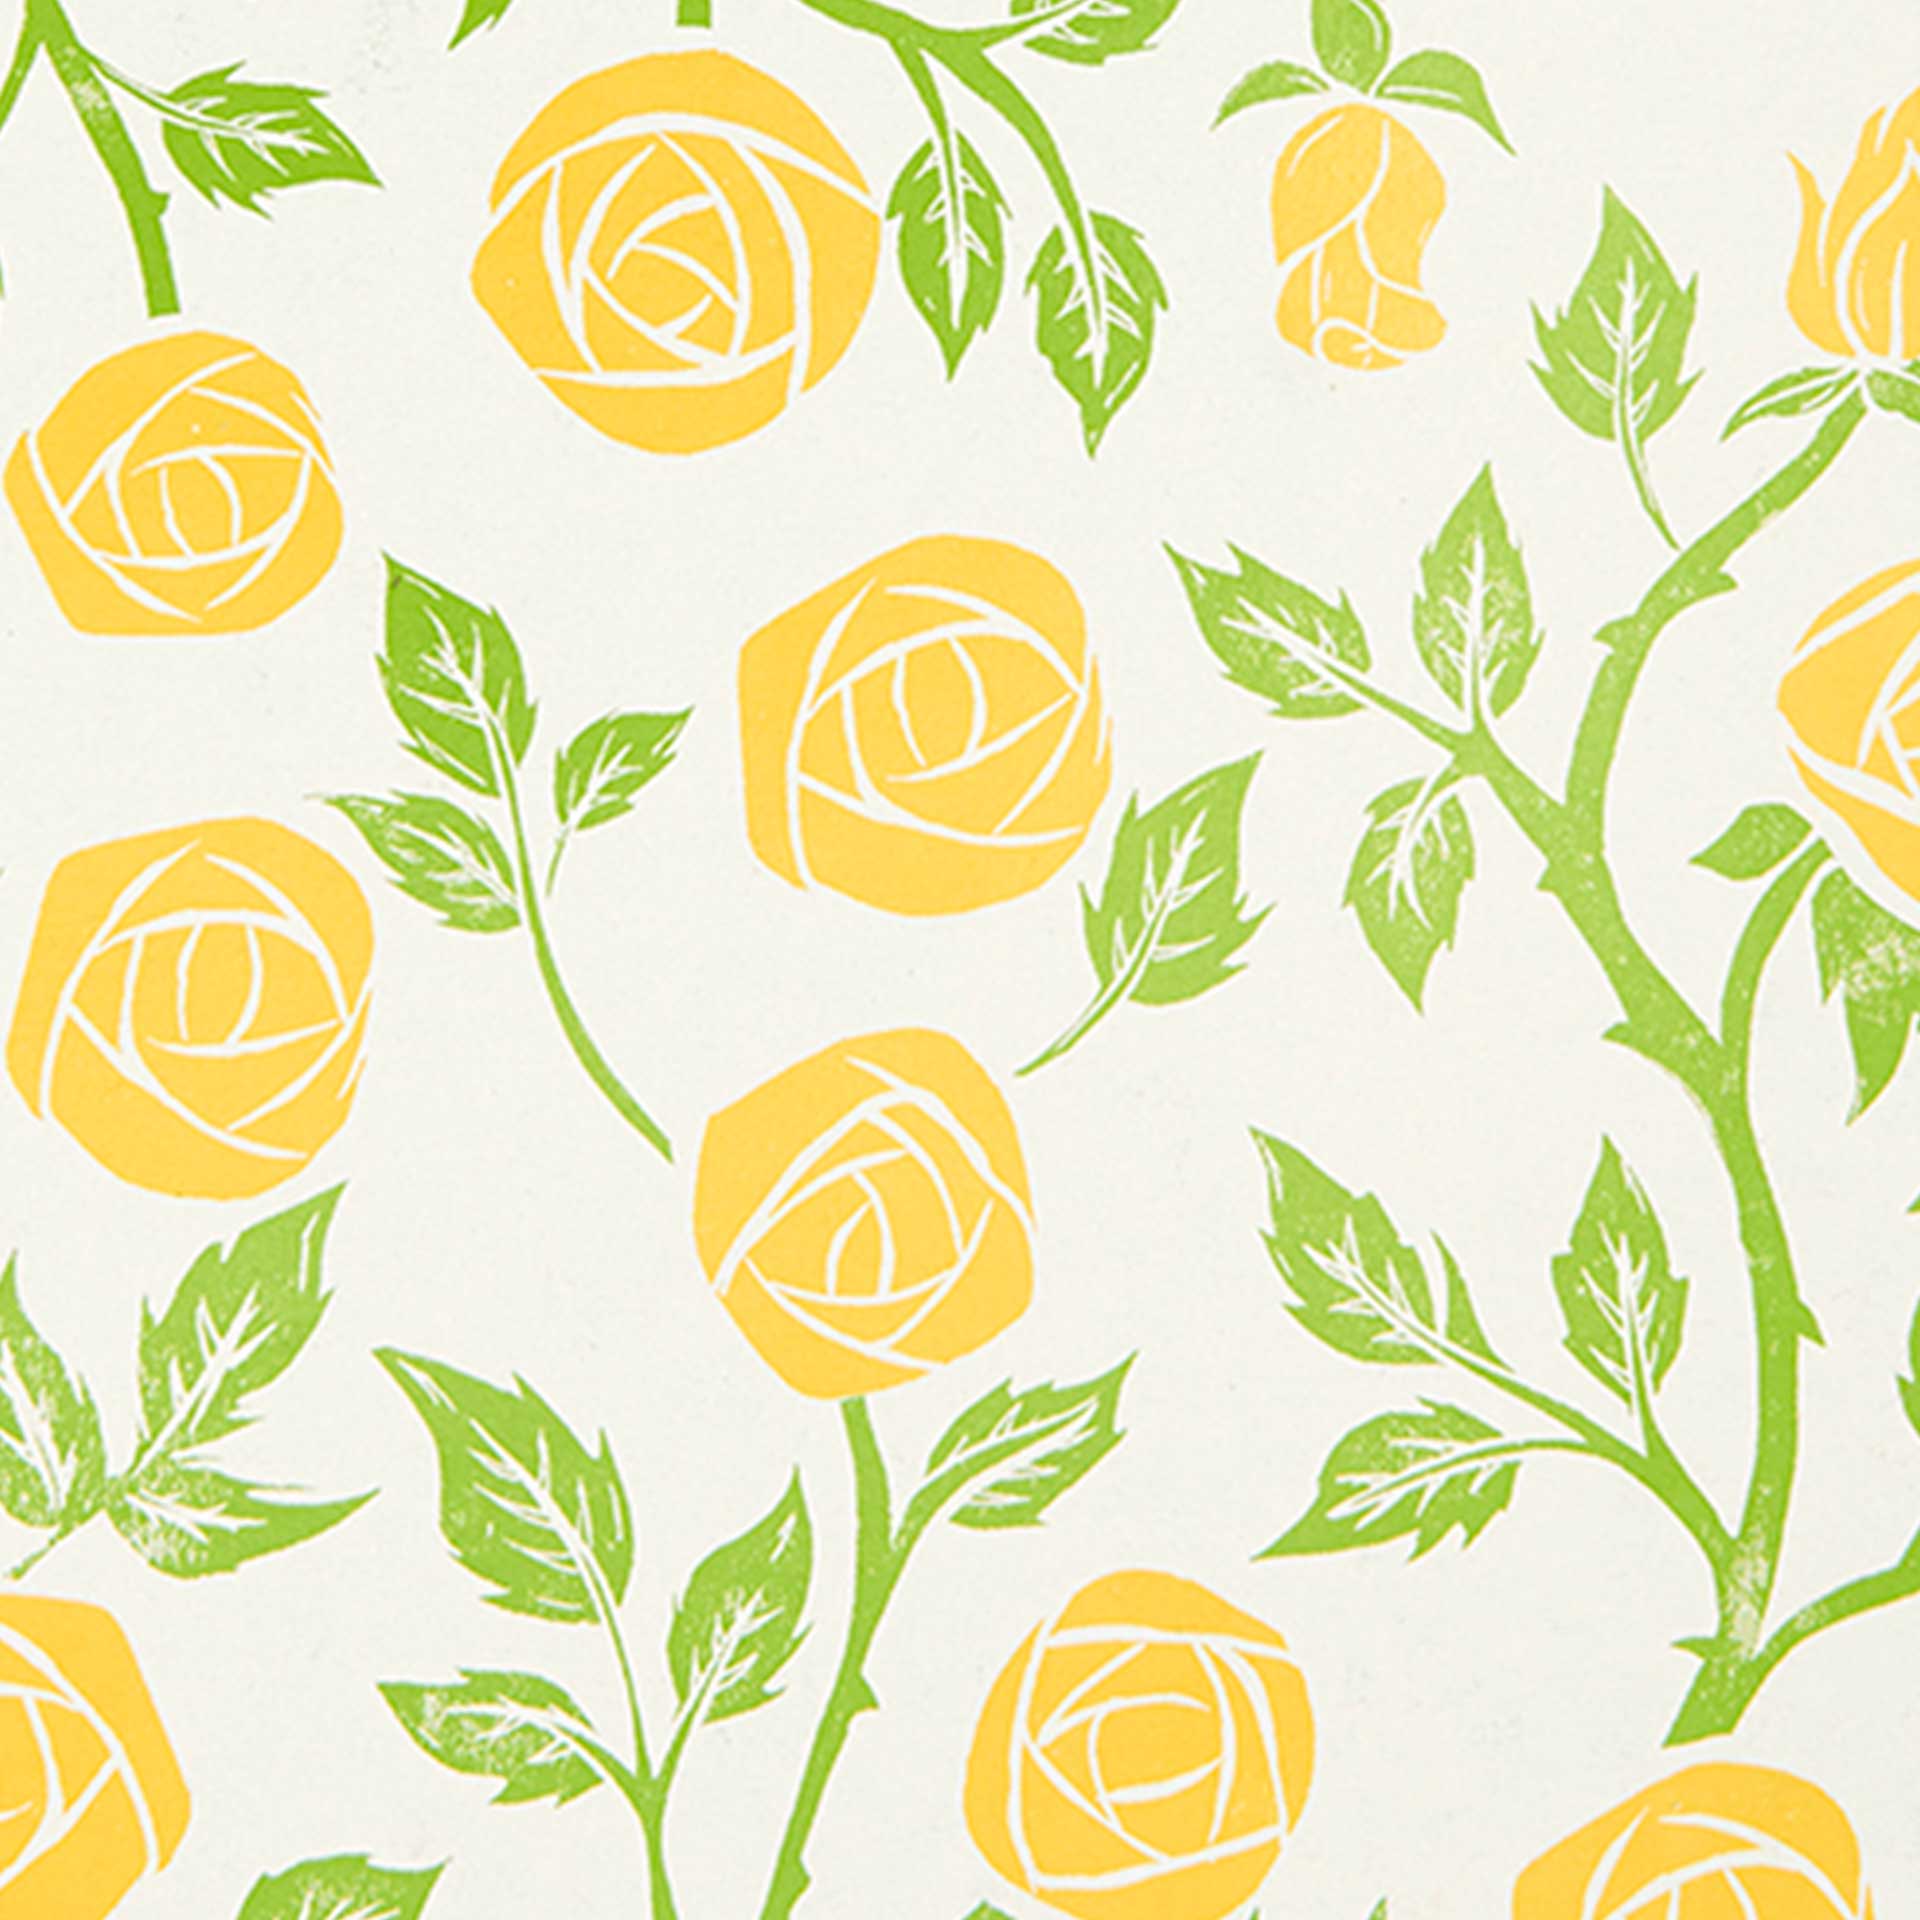 Closeup of yellow roses and green vines